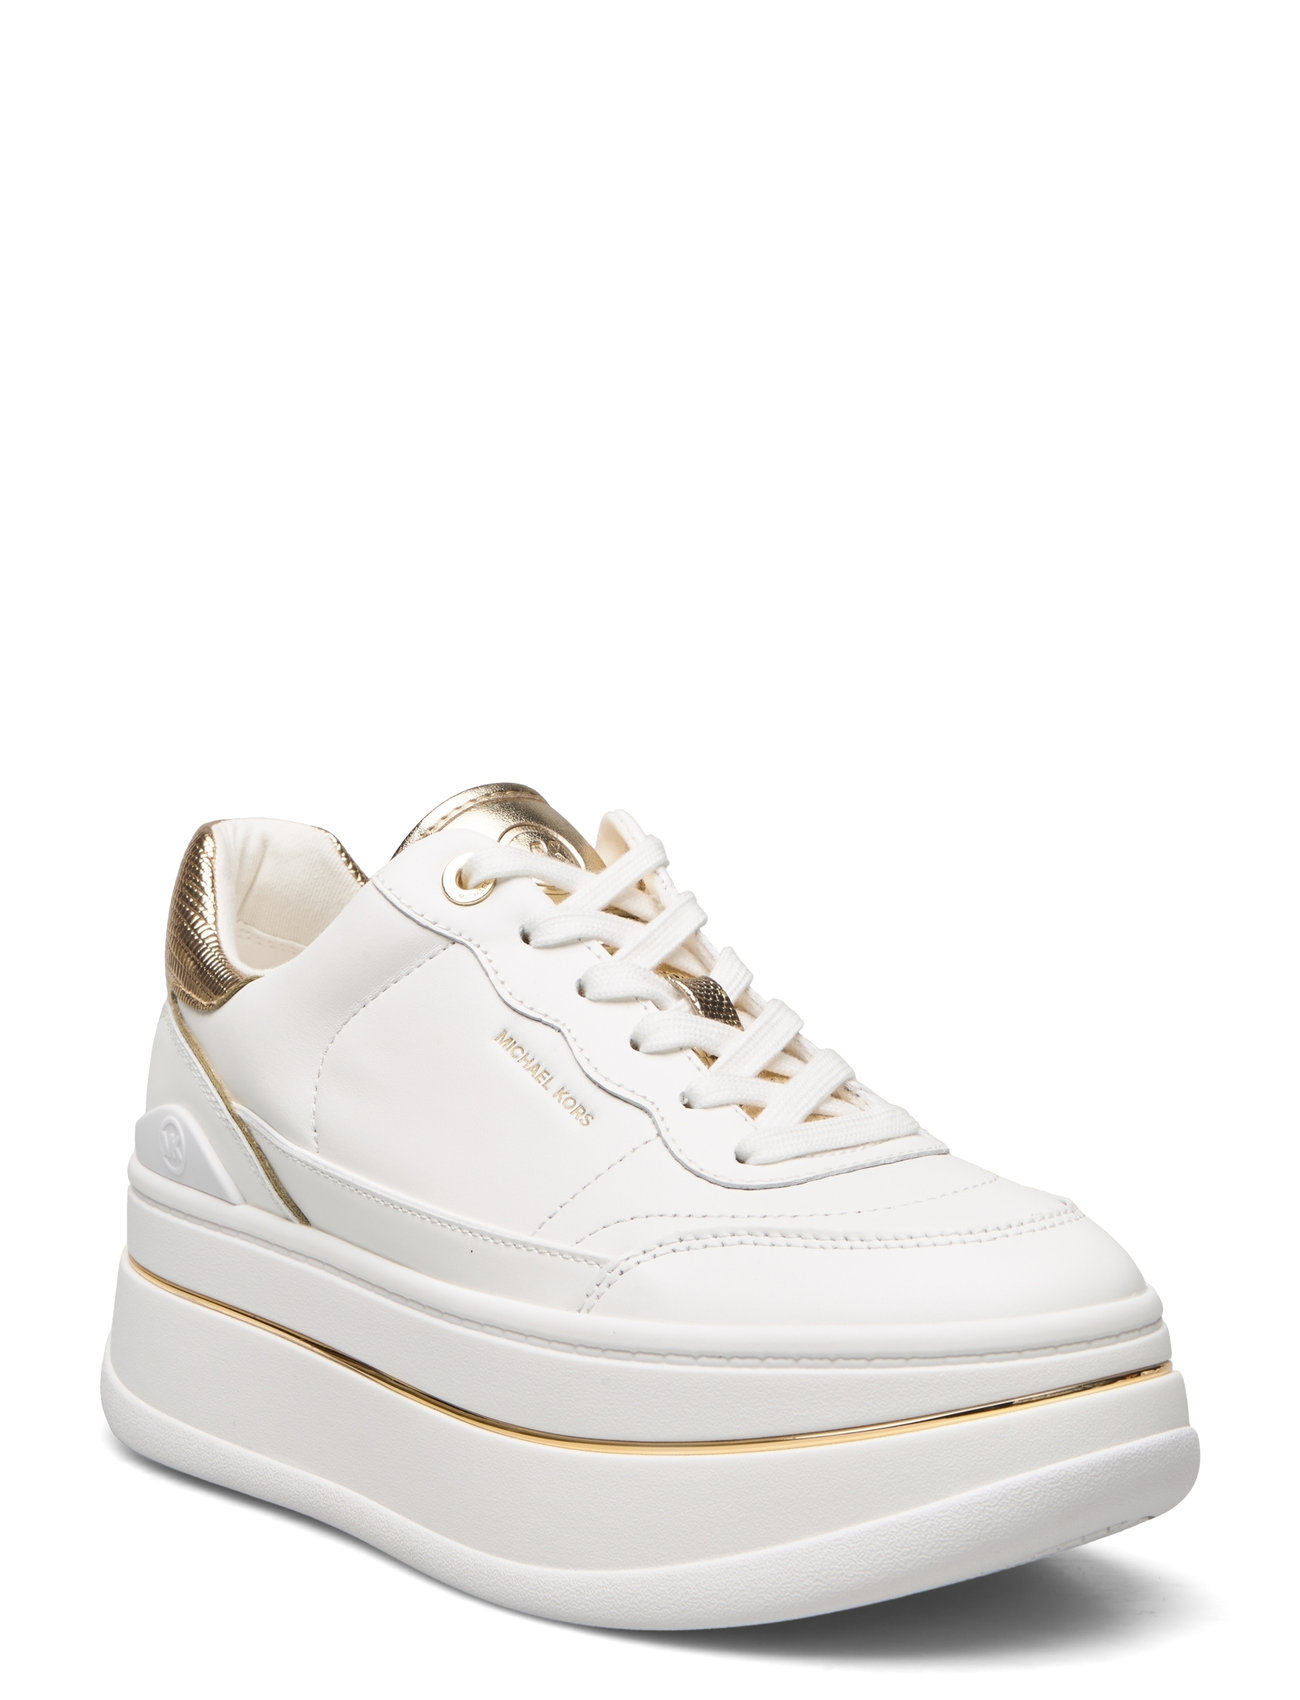 Hayes Lace Up Shoes Sneakers Chunky Sneakers White Michael Kors